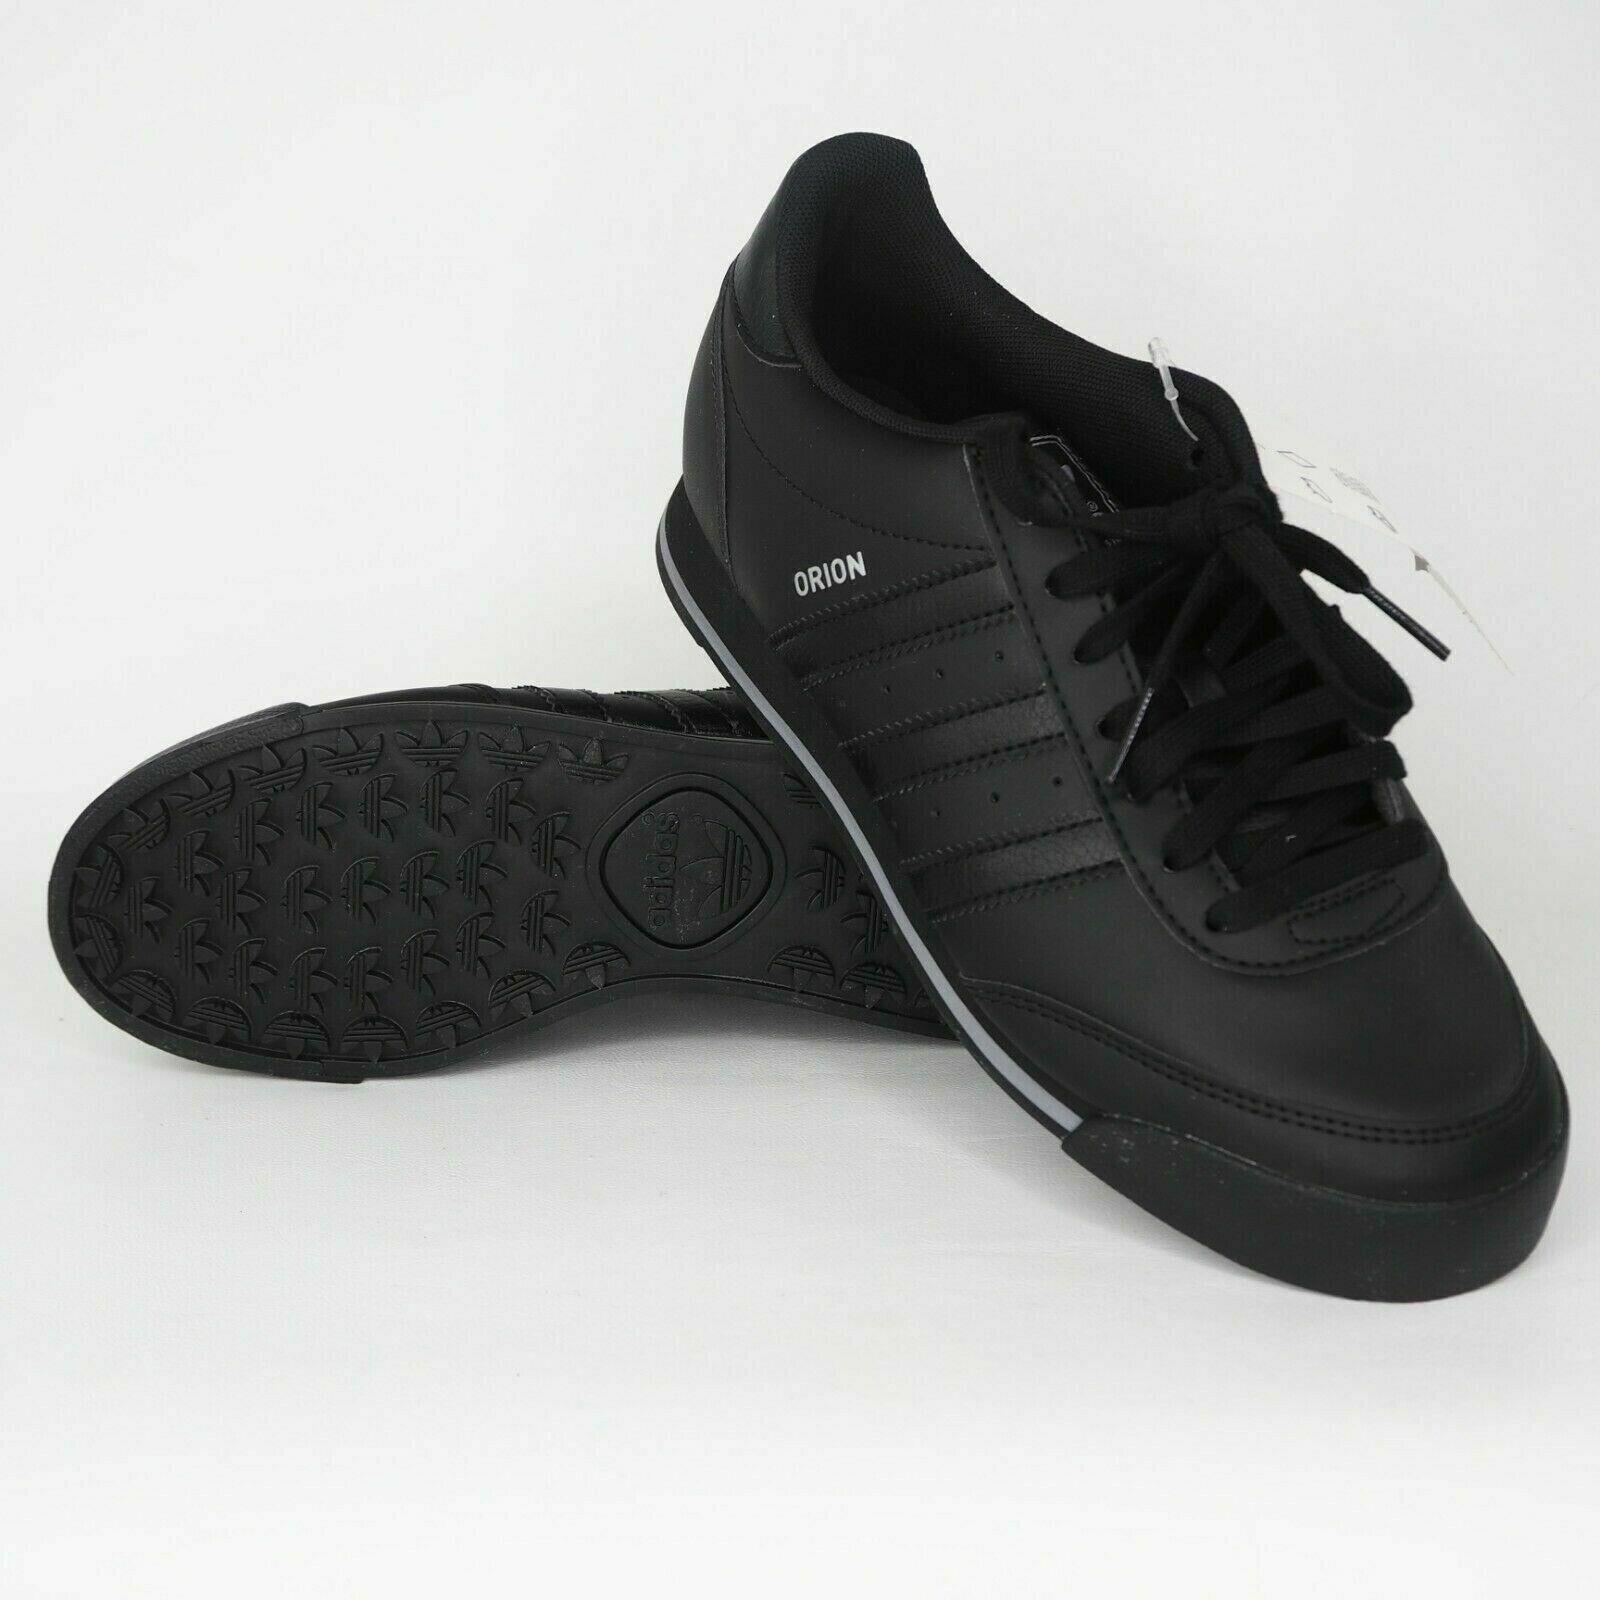 Adidas shoes Orion - Black 9